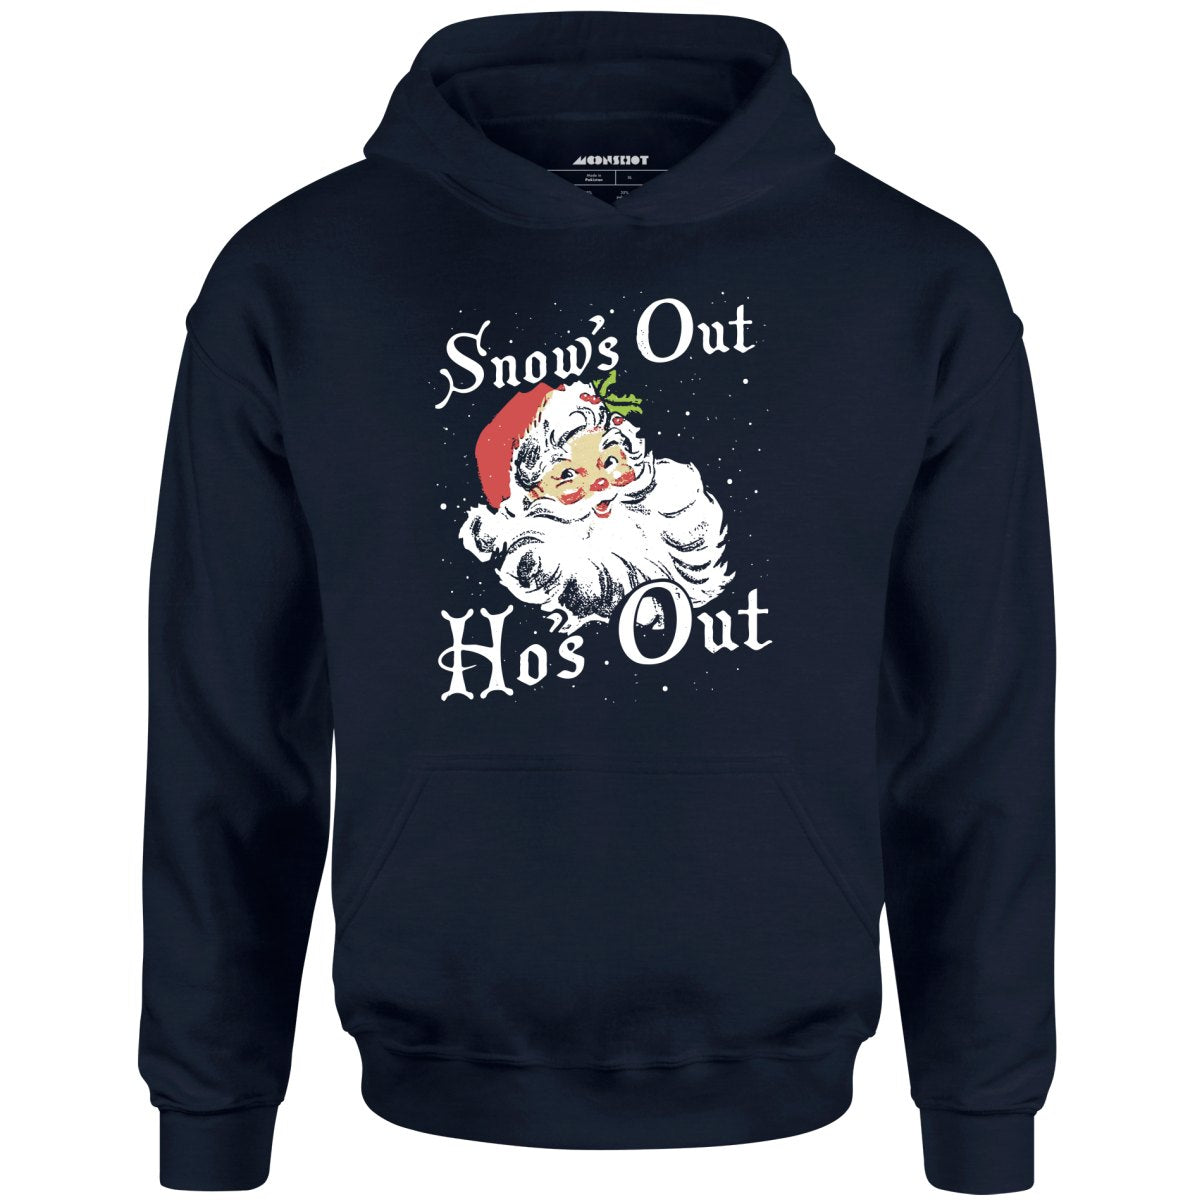 Image of Snow's Out Ho's Out - Unisex Hoodie